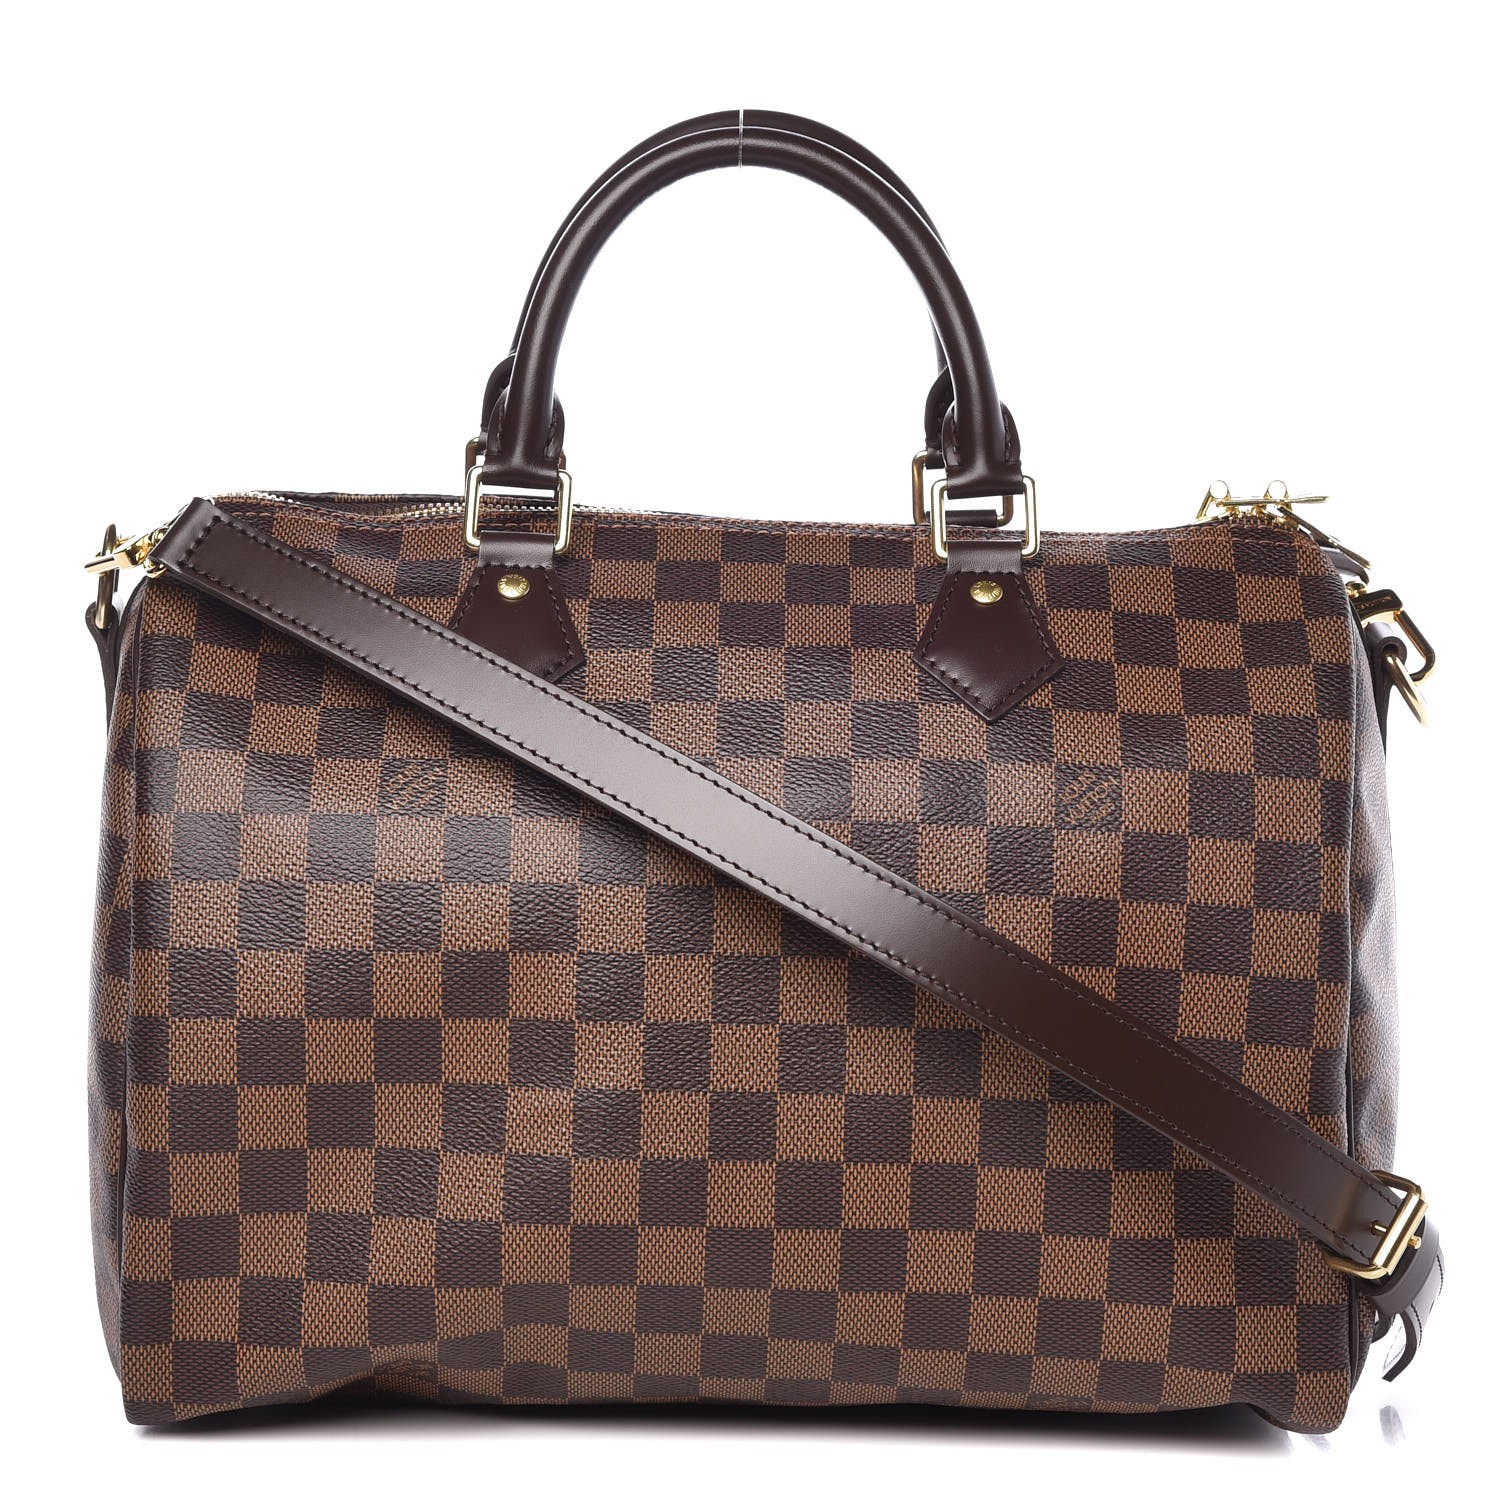 Just got my new speedy bandouliere 25 in damier ebene and it's